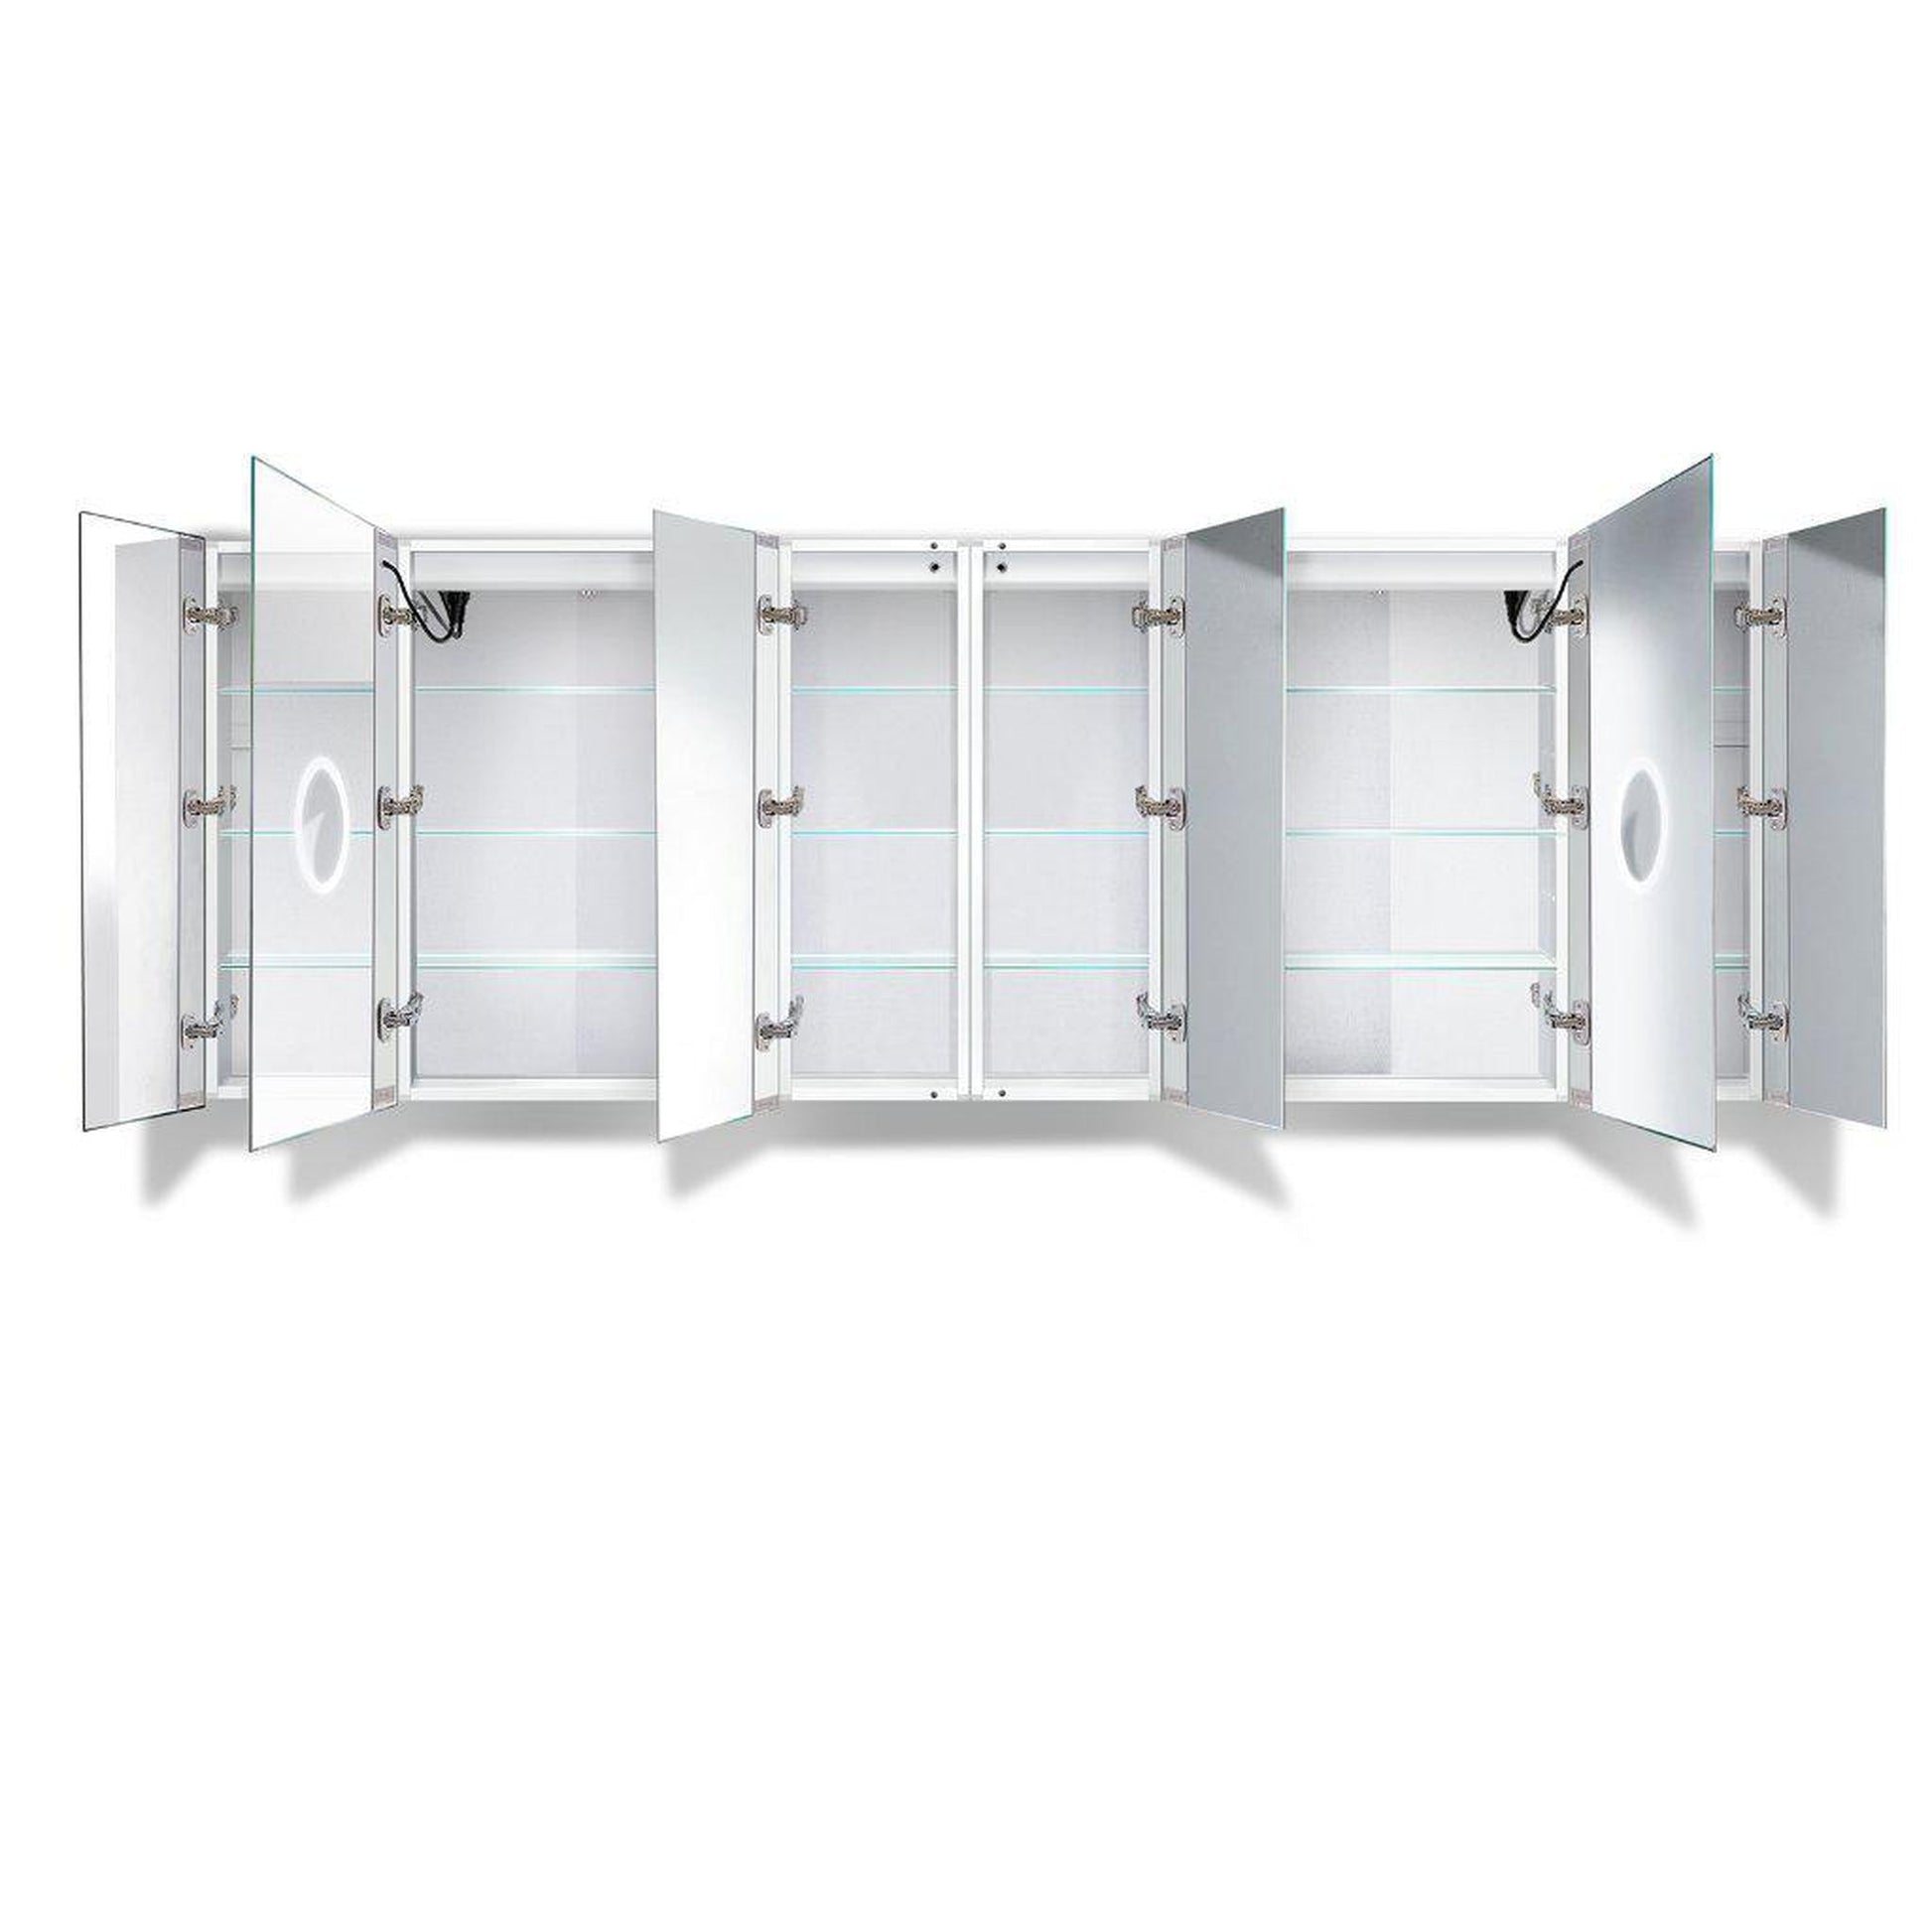 Krugg Reflections Svange 96" x 36" 5000K Double Hexa-View Left-Left-Left-Right-Right-Right Opening Recessed/Surface-Mount Illuminated Silver Backed LED Medicine Cabinet Mirror With Built-in Defogger, Dimmer and Electrical Outlet